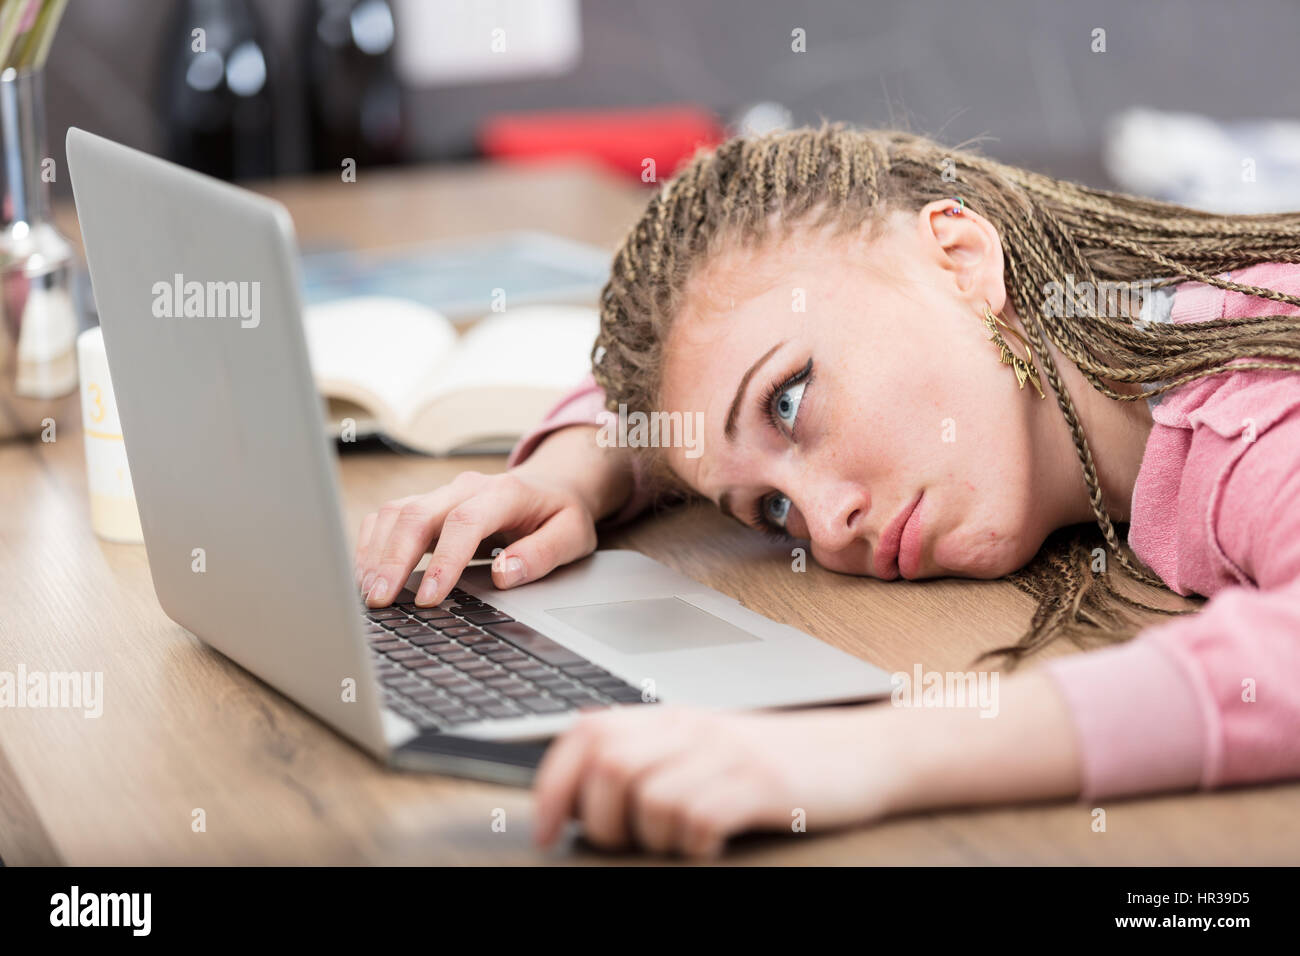 Tired Woman In Front Of A Laptop Computer In A Kitchen Bored Or Tired Because Of Her Unsuccessful Information Search Stock Photo Alamy